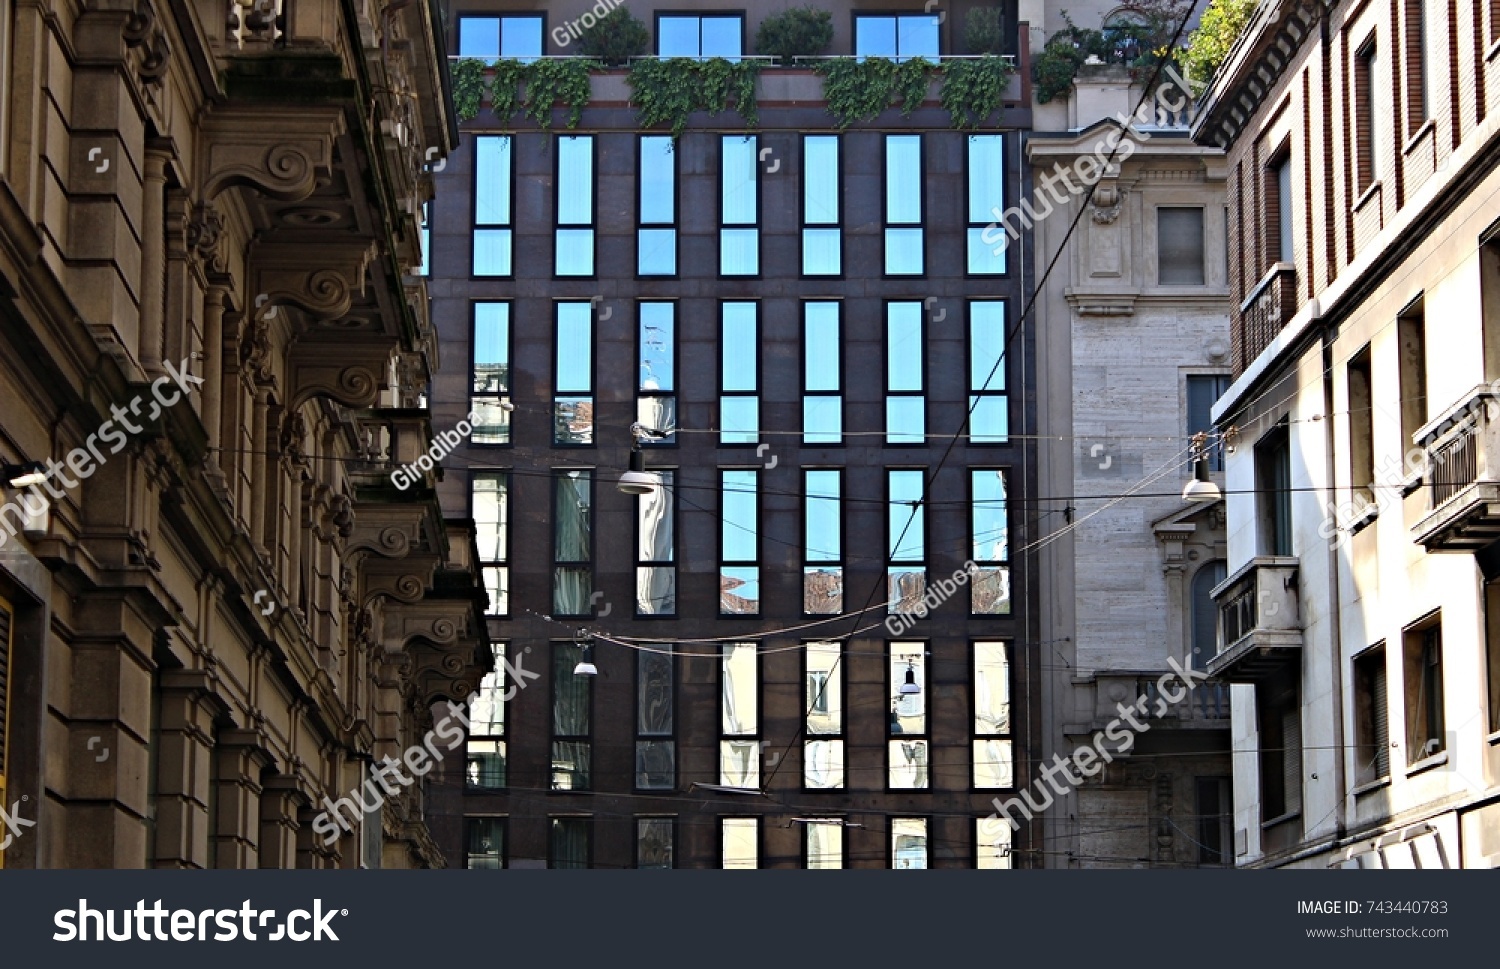 Italy, Milano: Reflection of old houses in glass house. #743440783